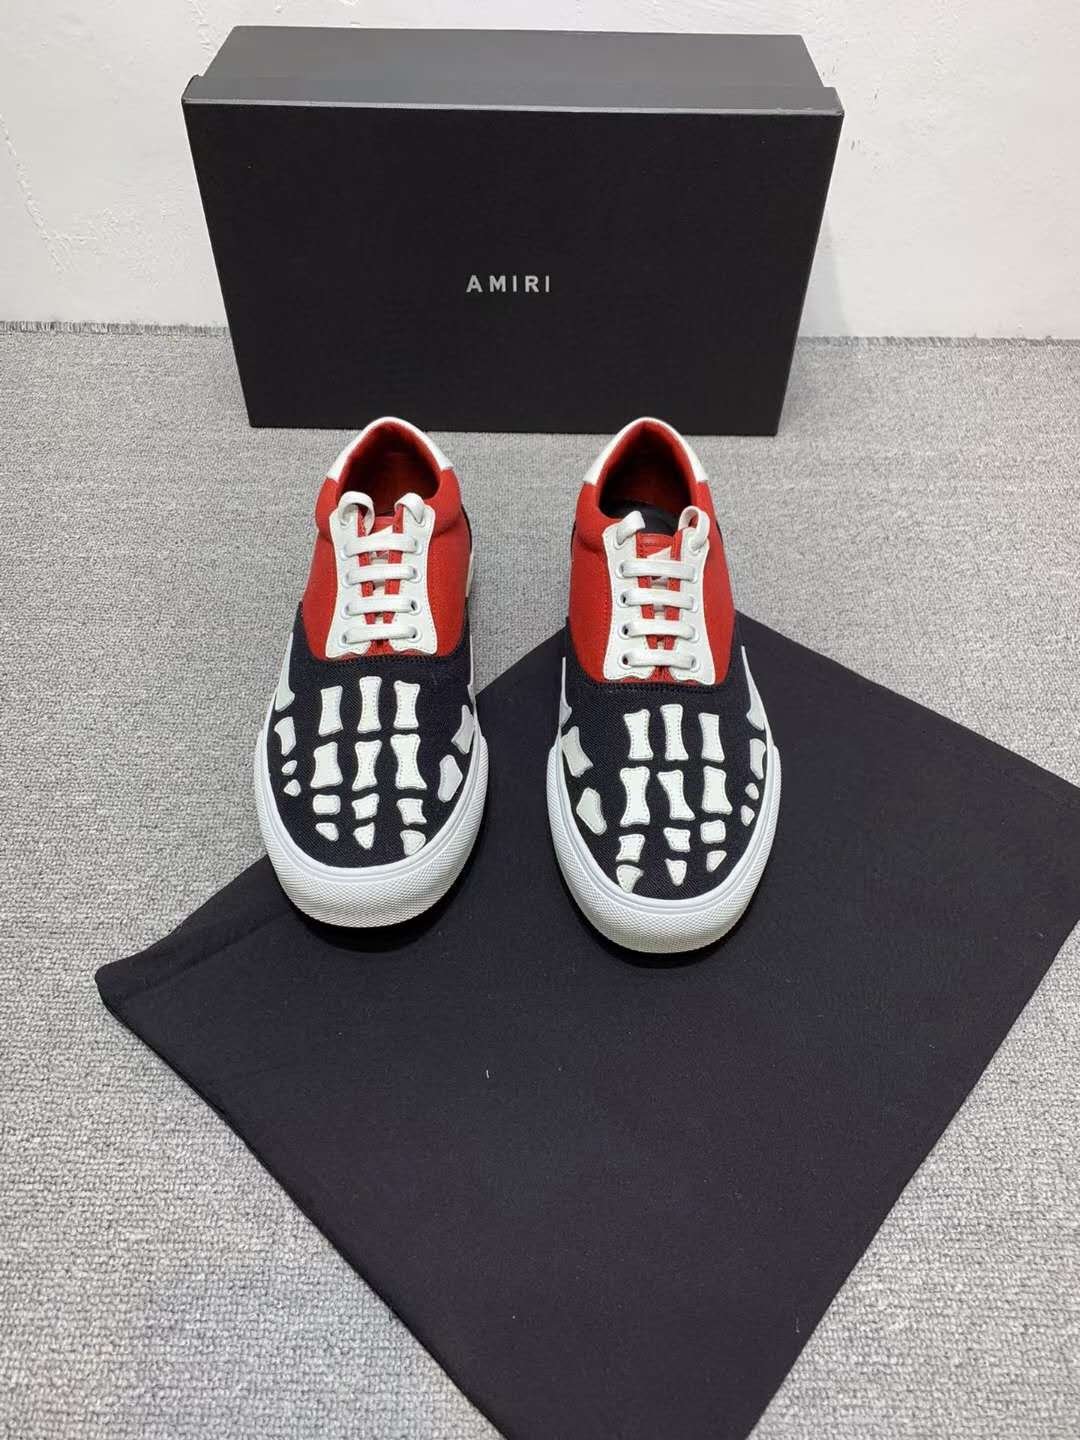 Man Shoes Amiri Skel Toe Lace Up Sneakers Skeleton Fashion Show Flats Shoes